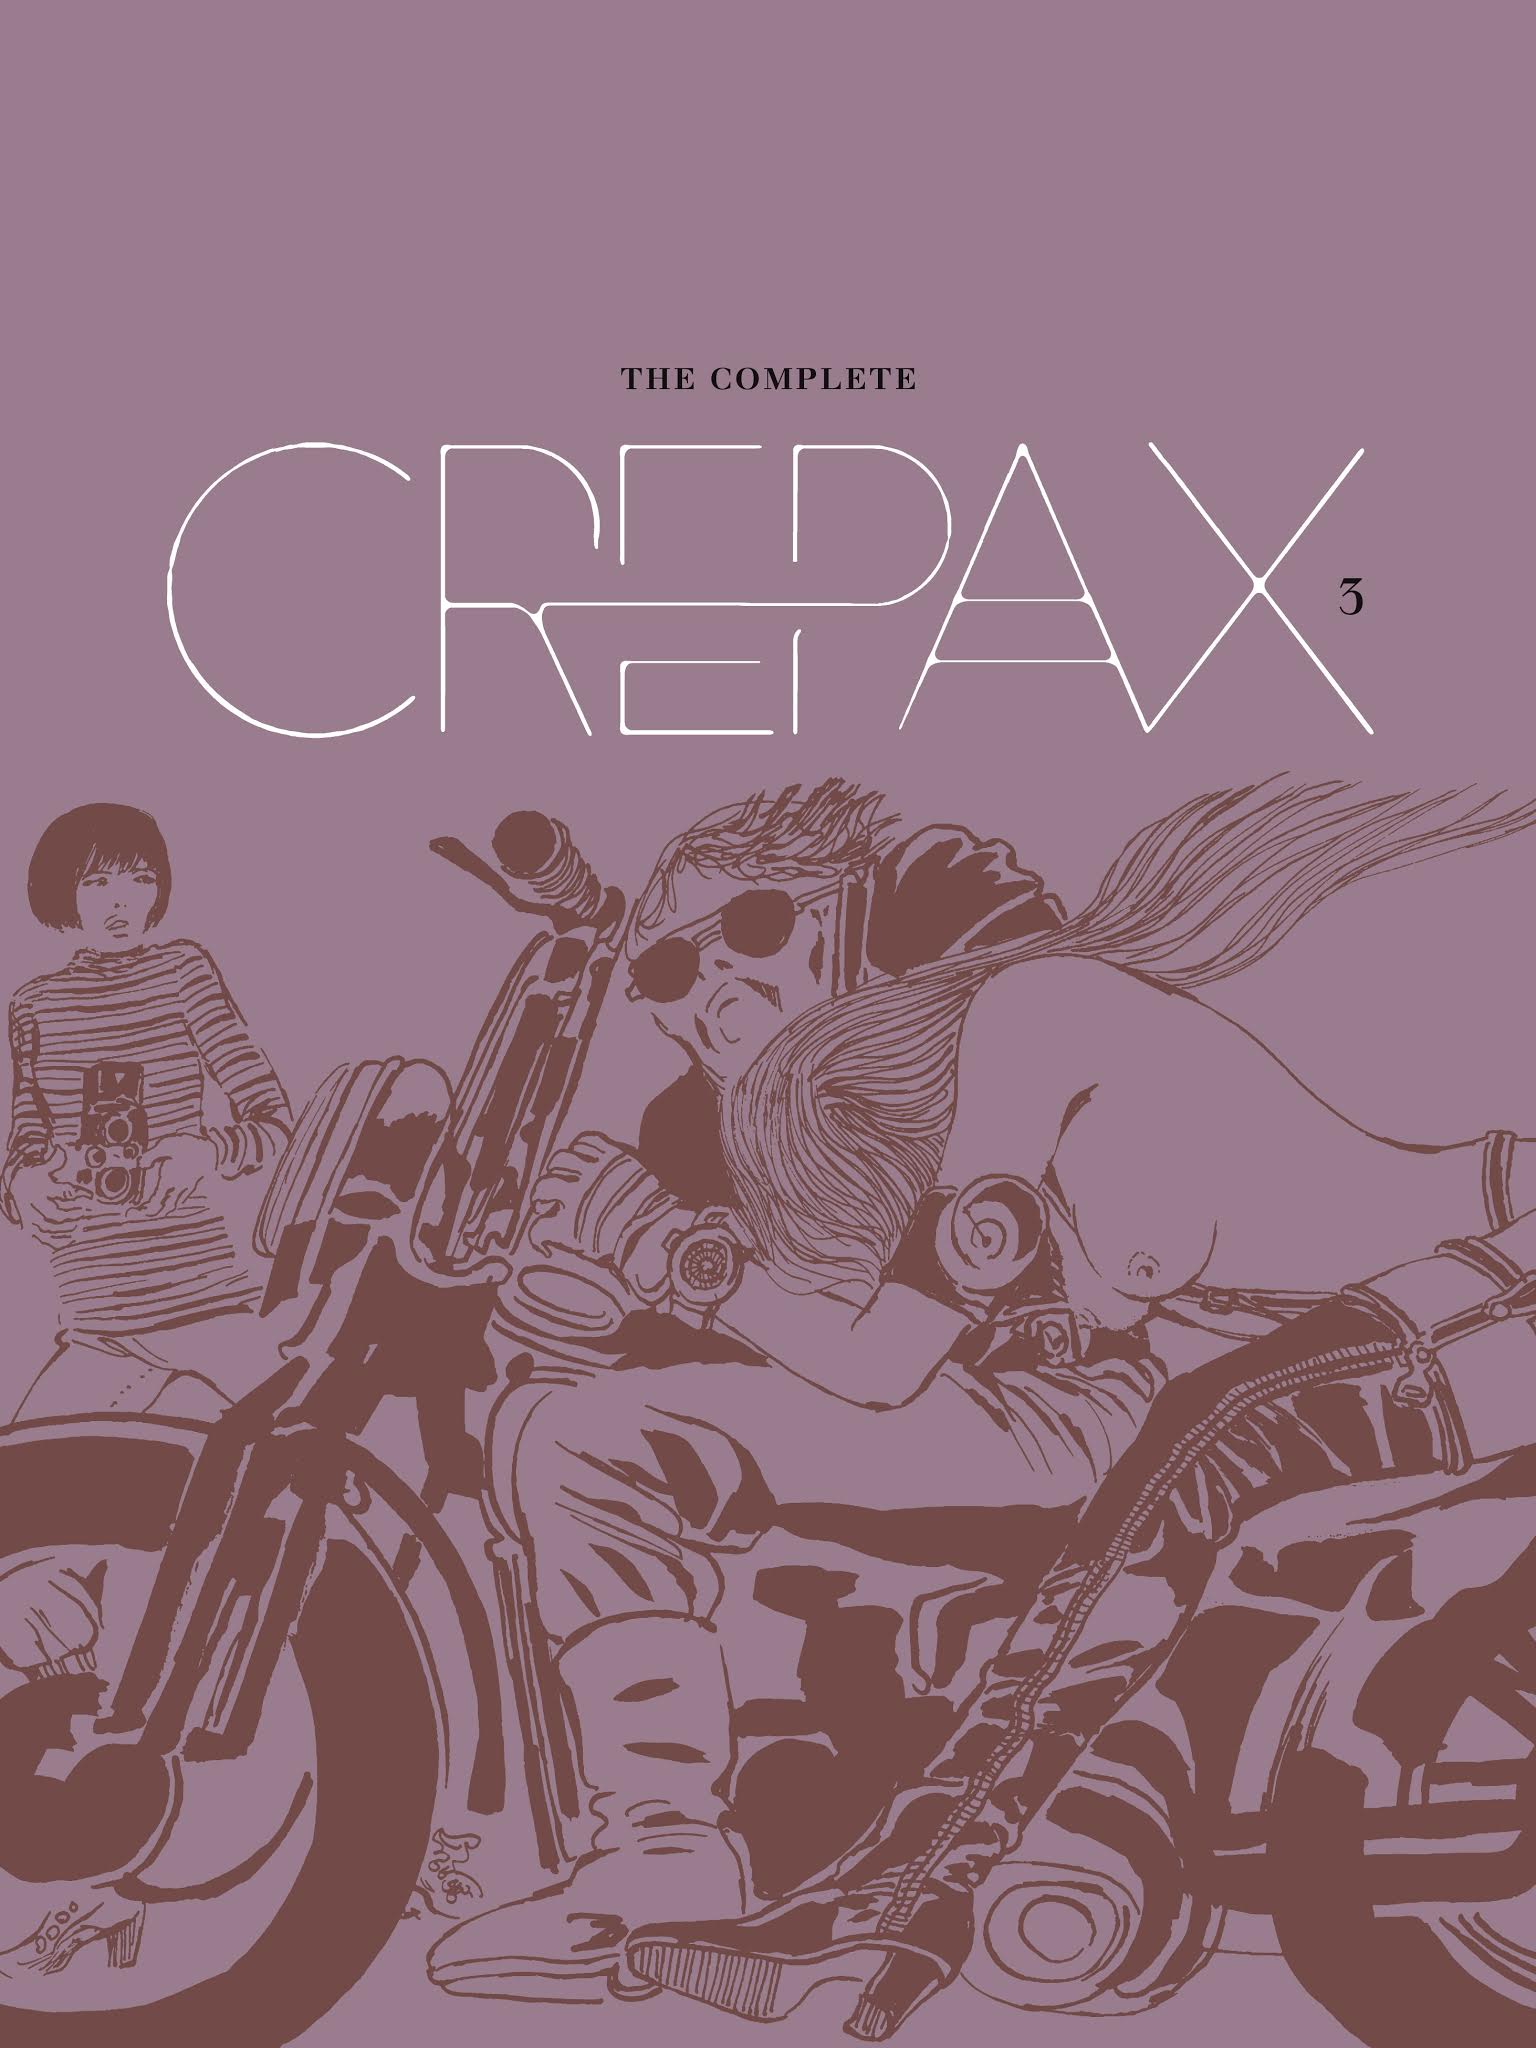 Read online The Complete Crepax comic -  Issue # TPB 3 - 2